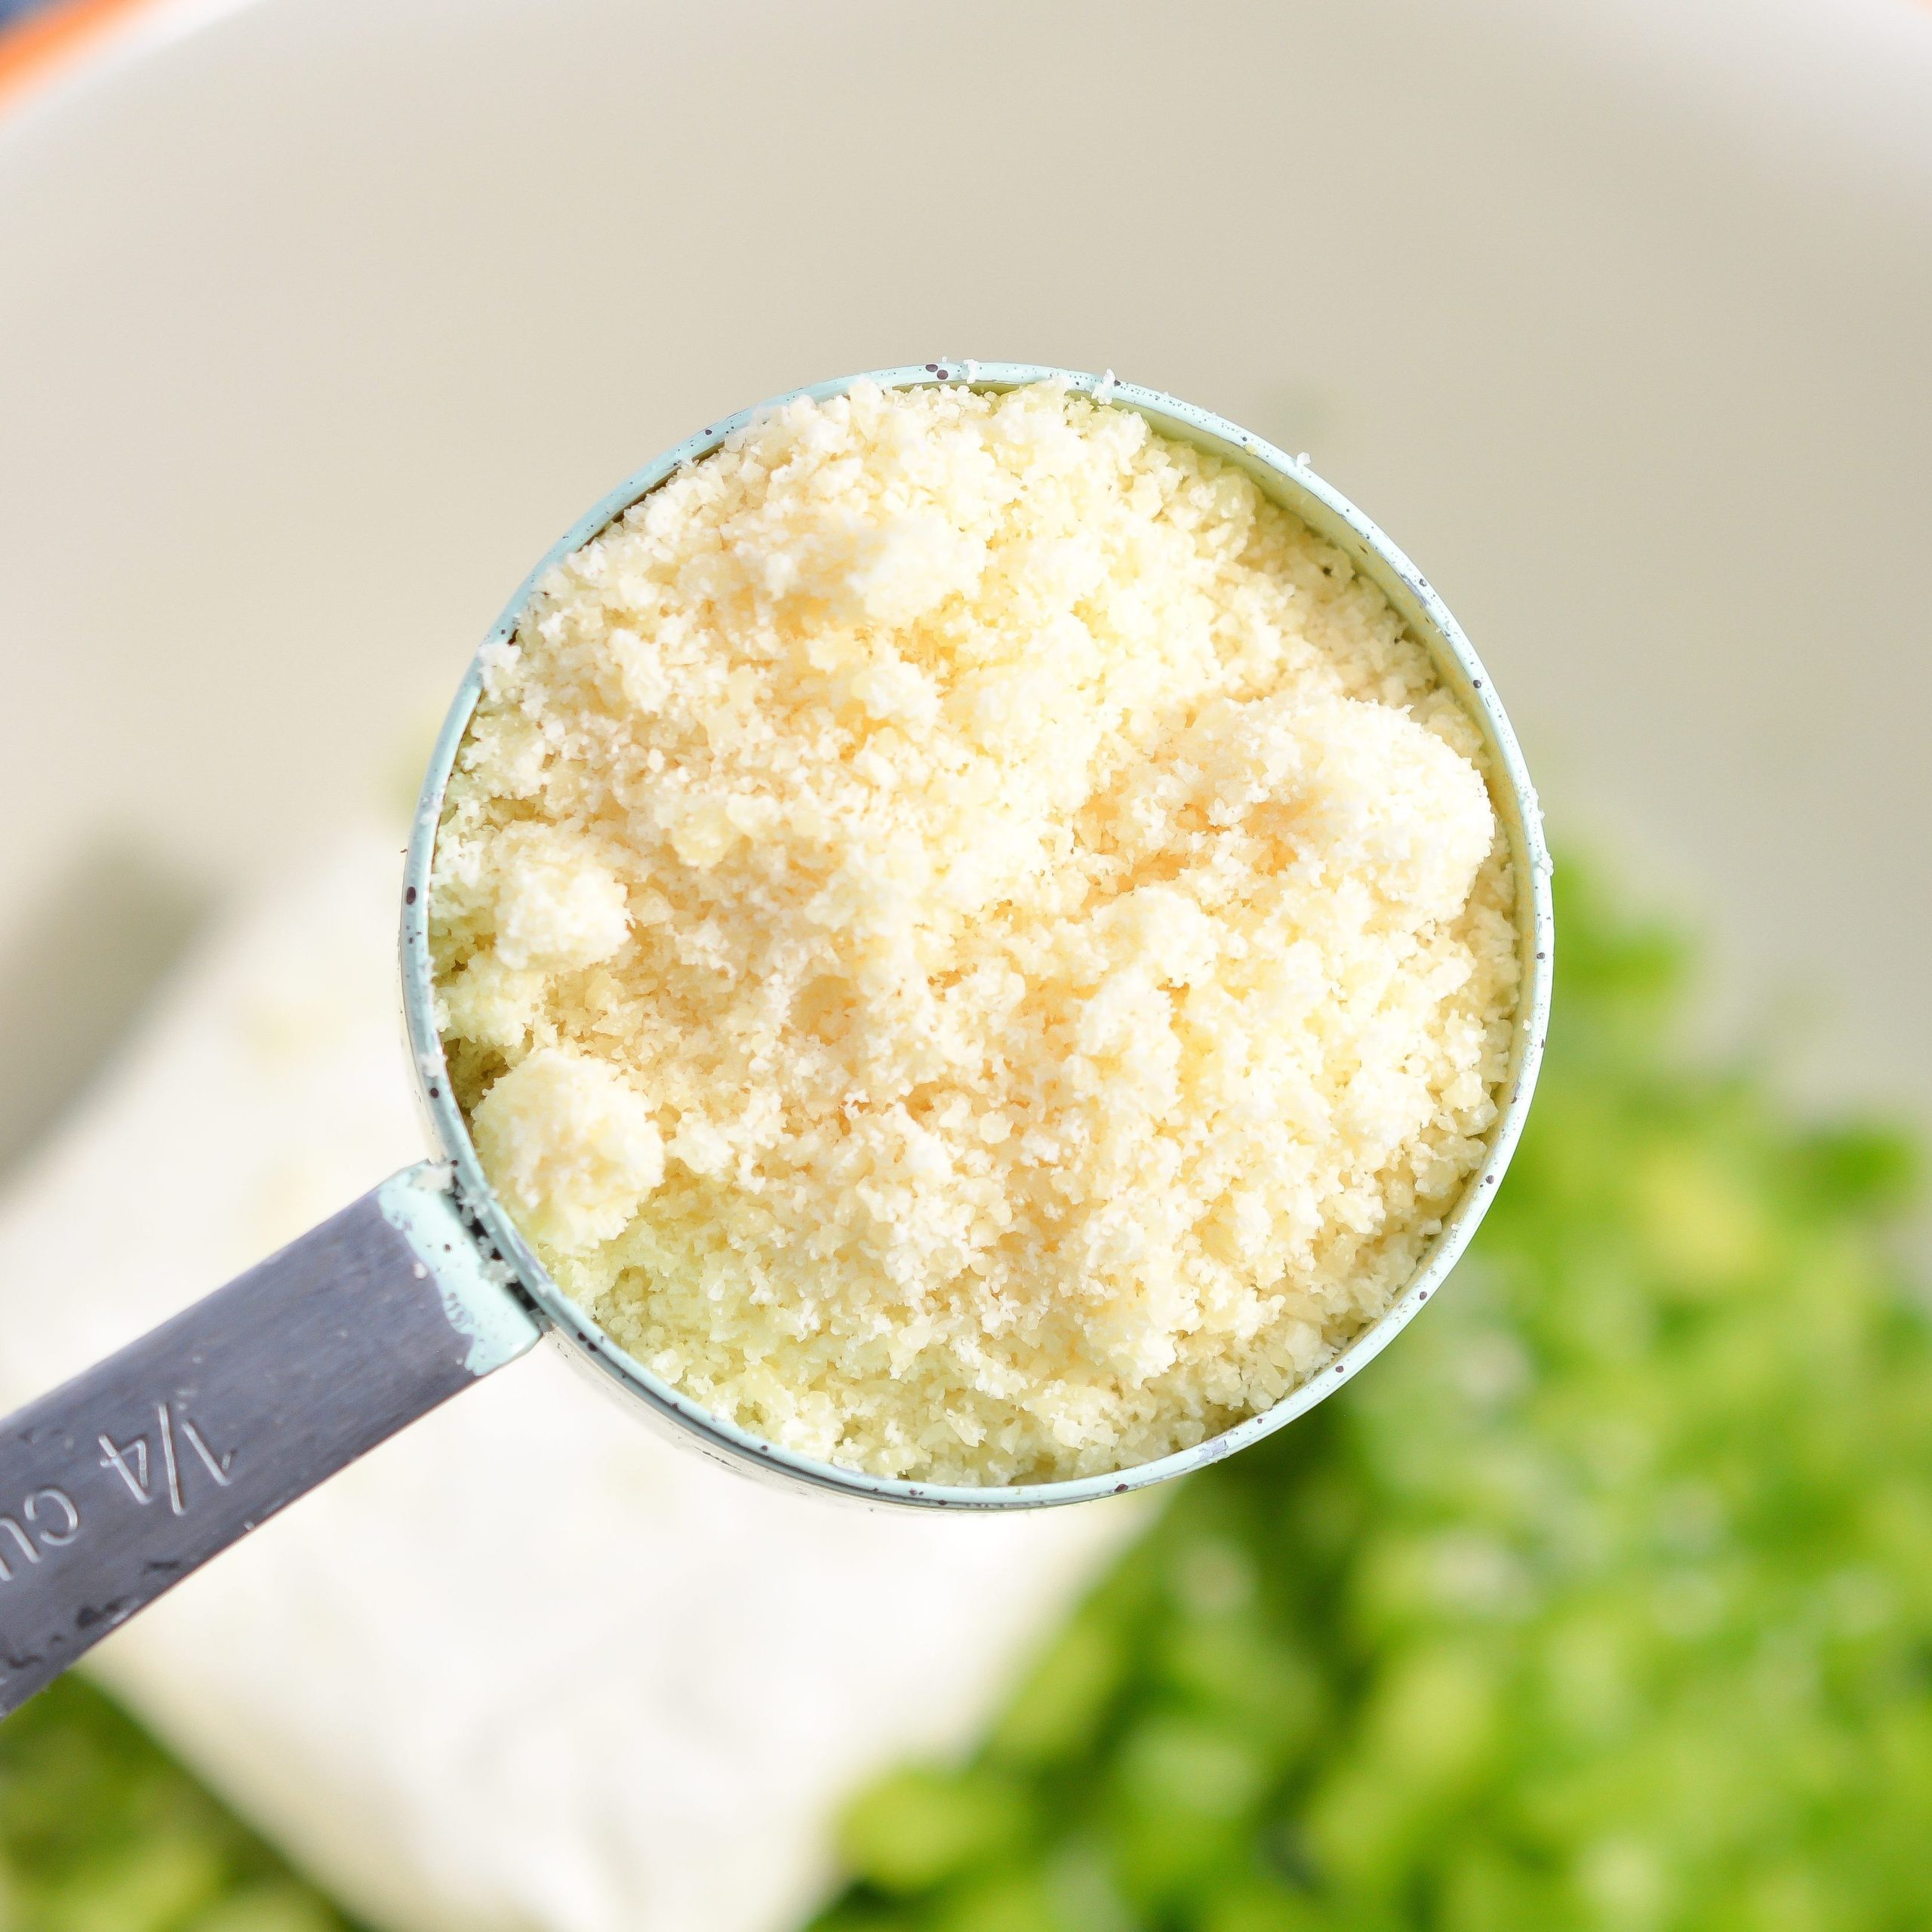 add ¼ cup of parmesan cheese grated.